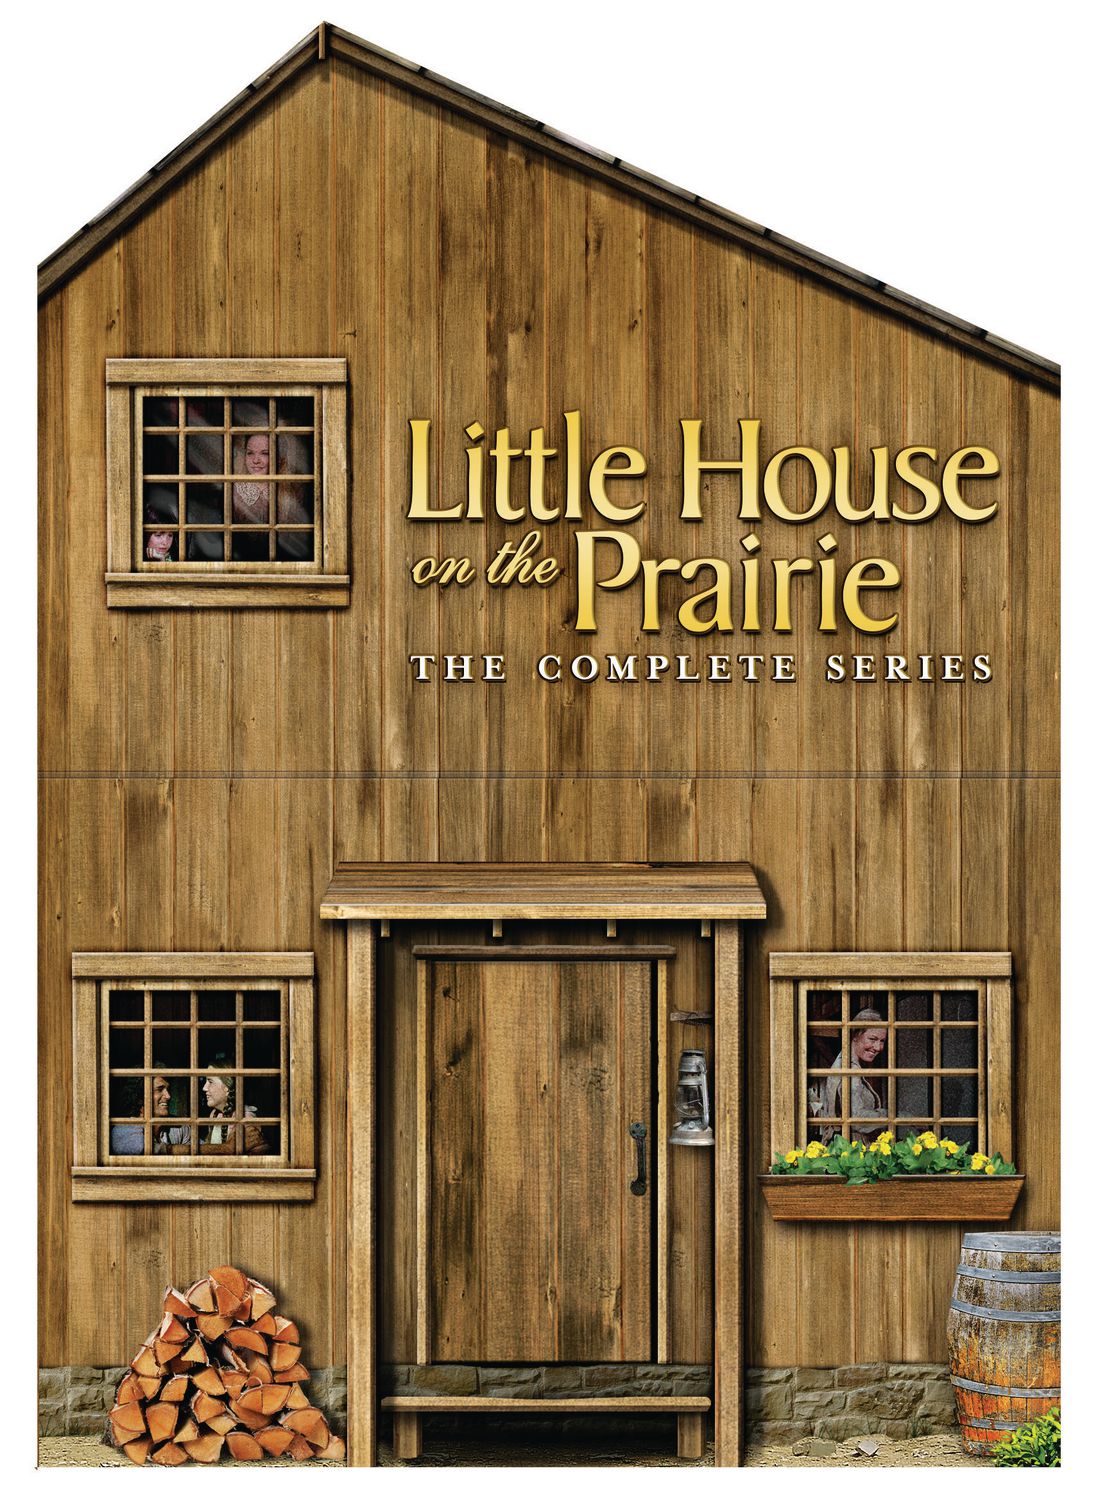 download torrent little house on the prairie complete